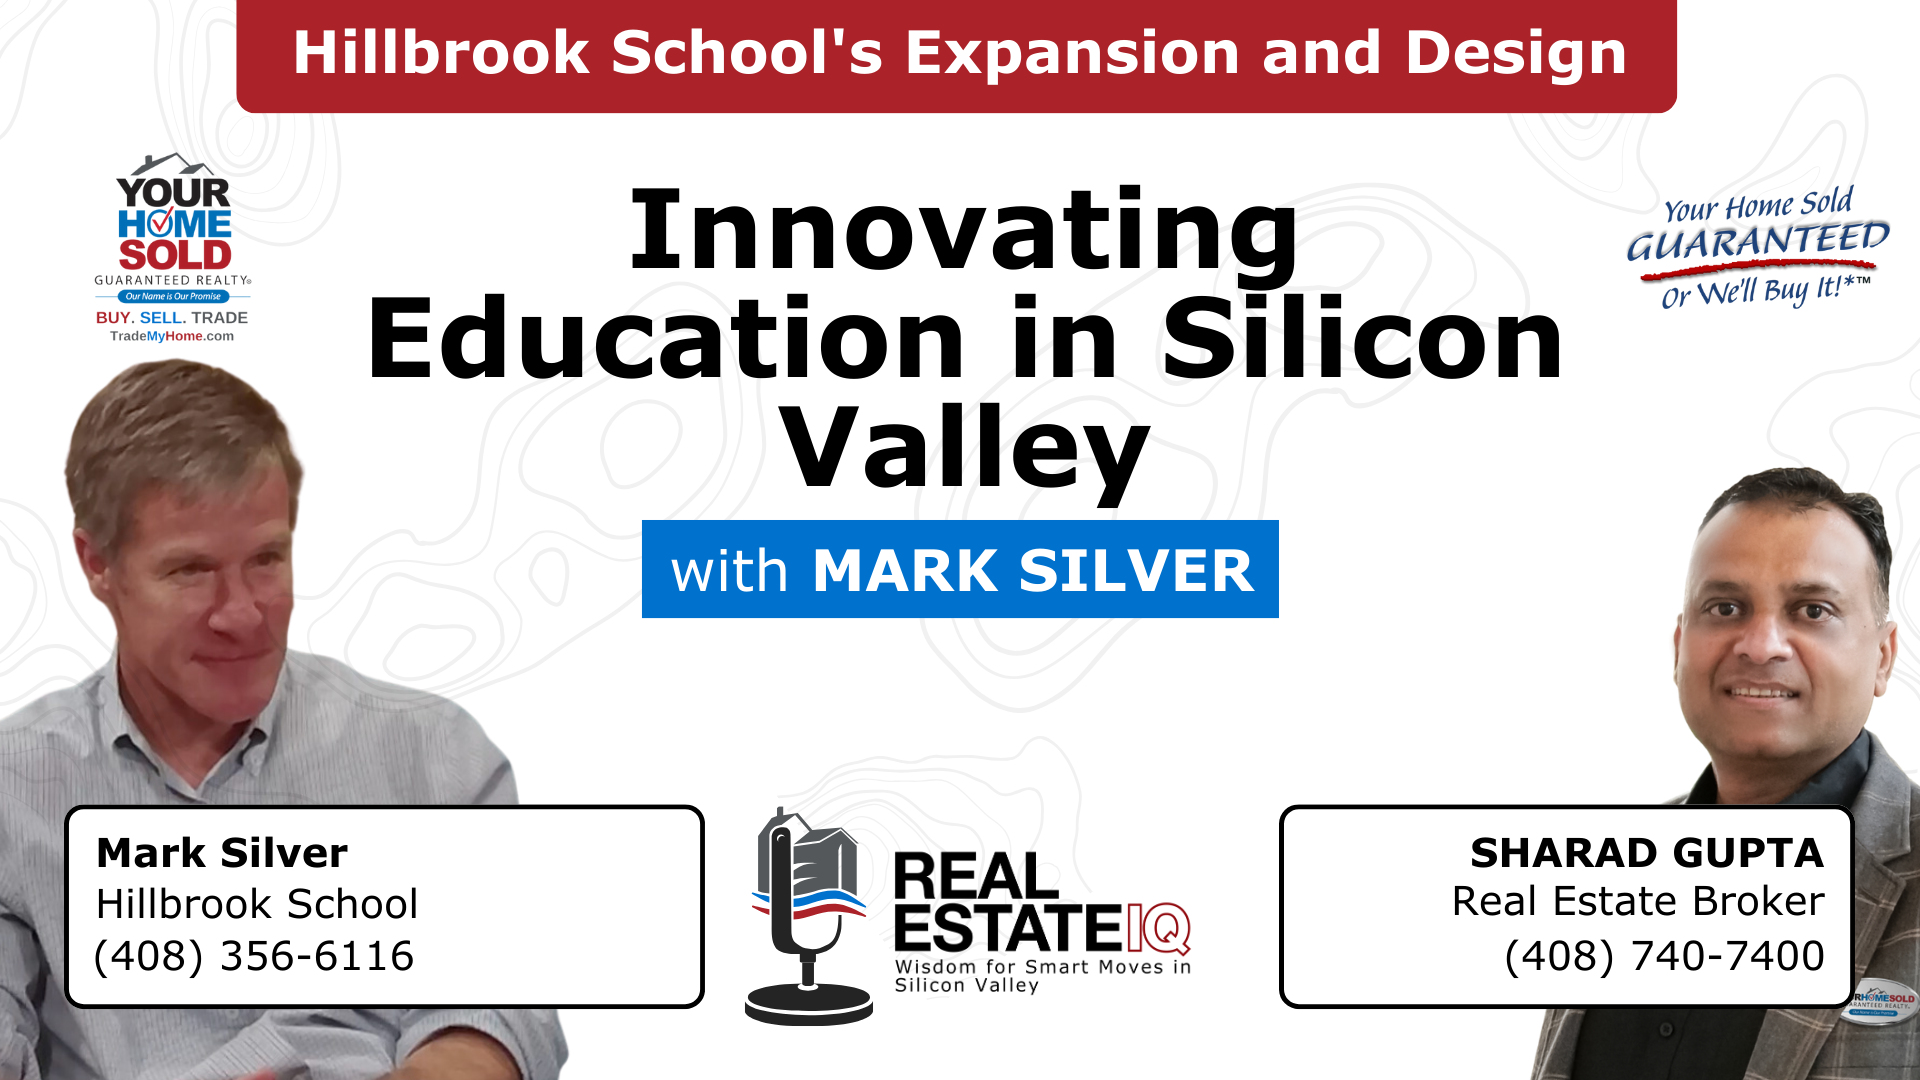 Innovating Education: Hillbrook School's Expansion and Design in Silicon Valley